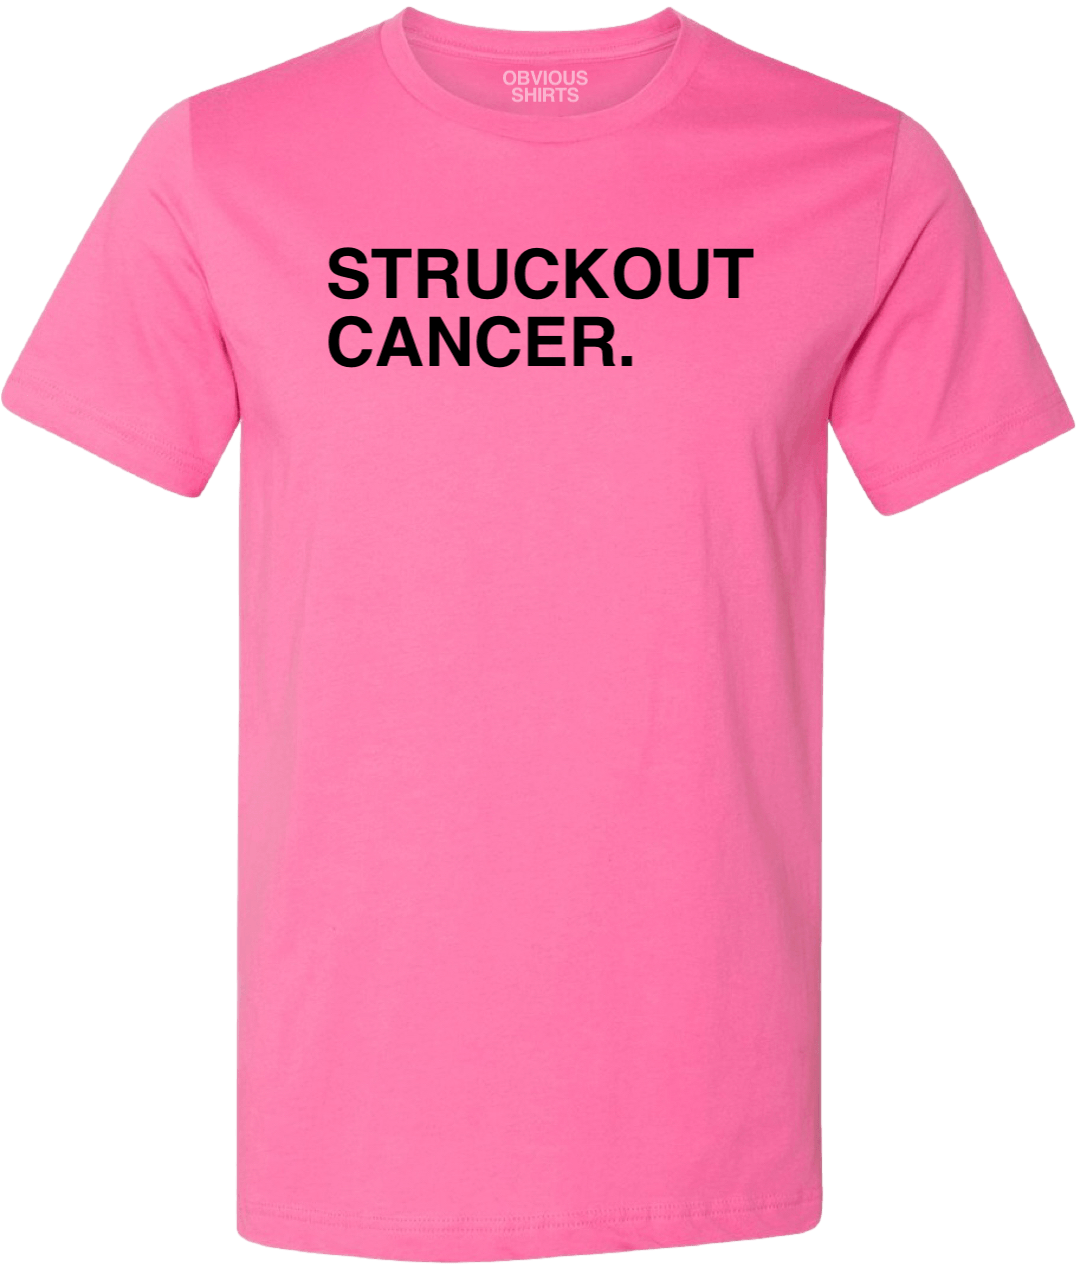 STRUCKOUT CANCER. (100% DONATED) - OBVIOUS SHIRTS